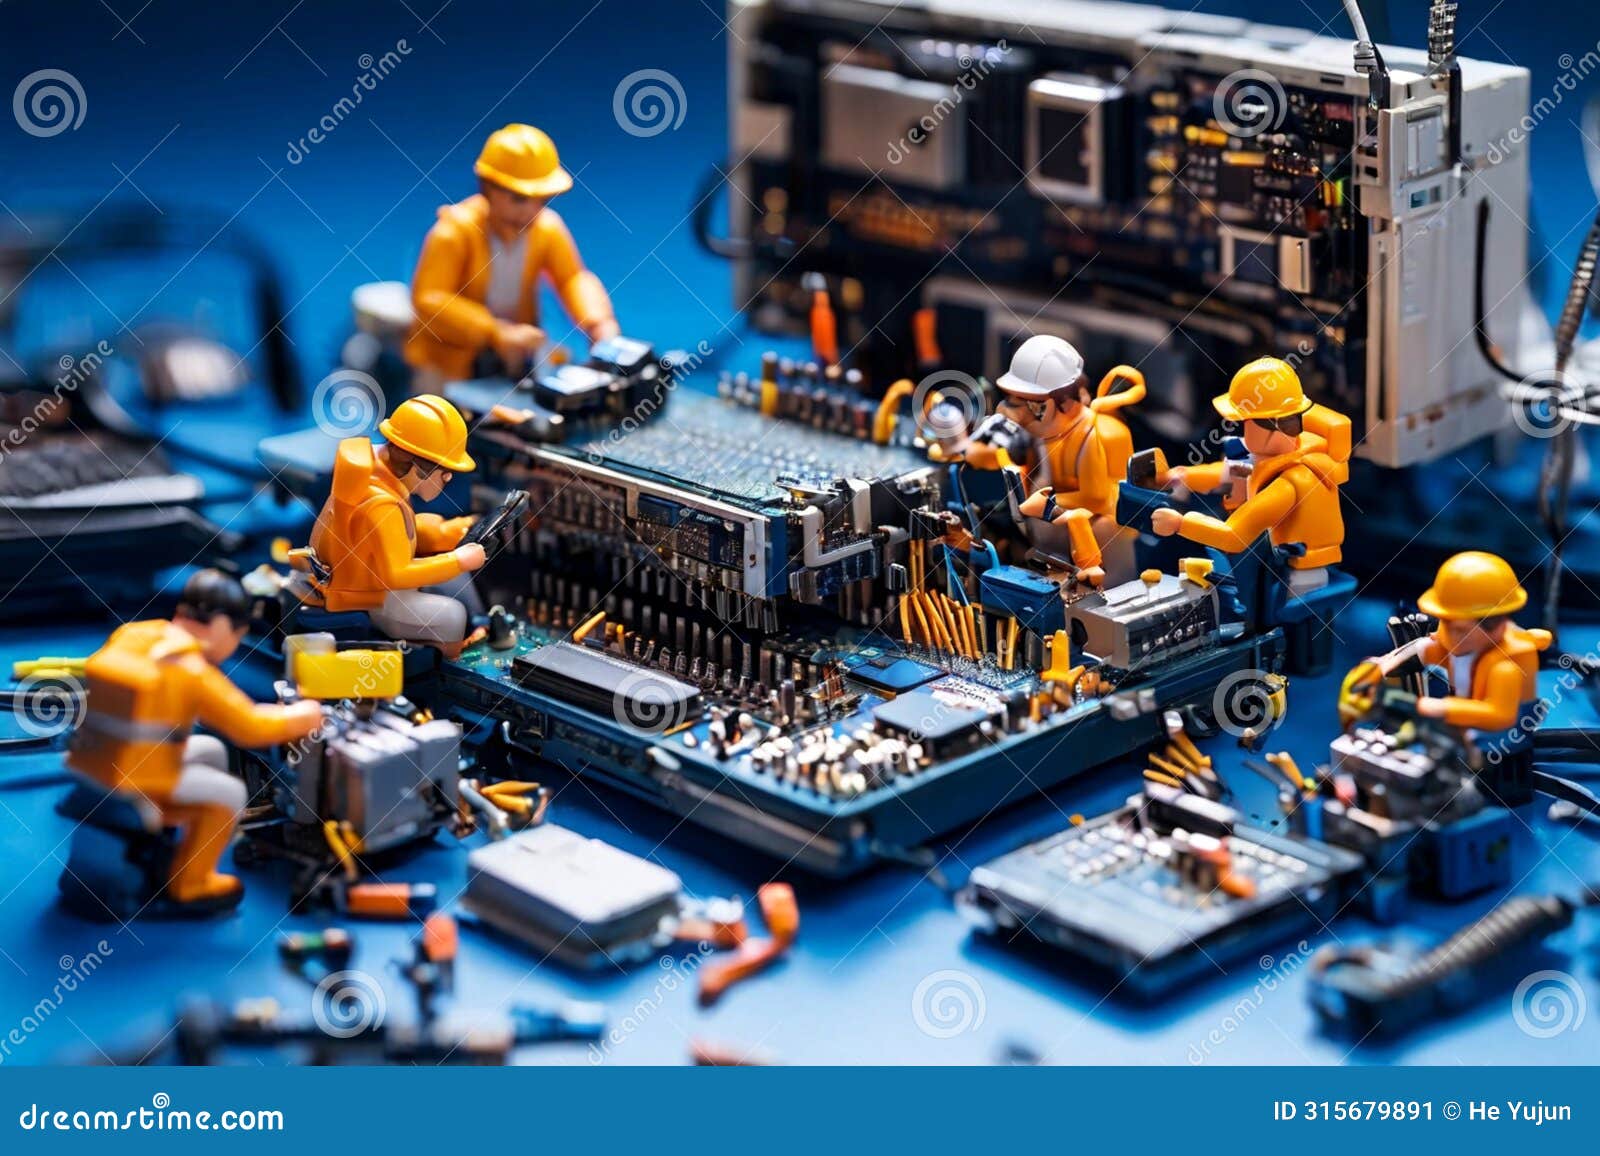 miniature technicians working on a computer circuit board